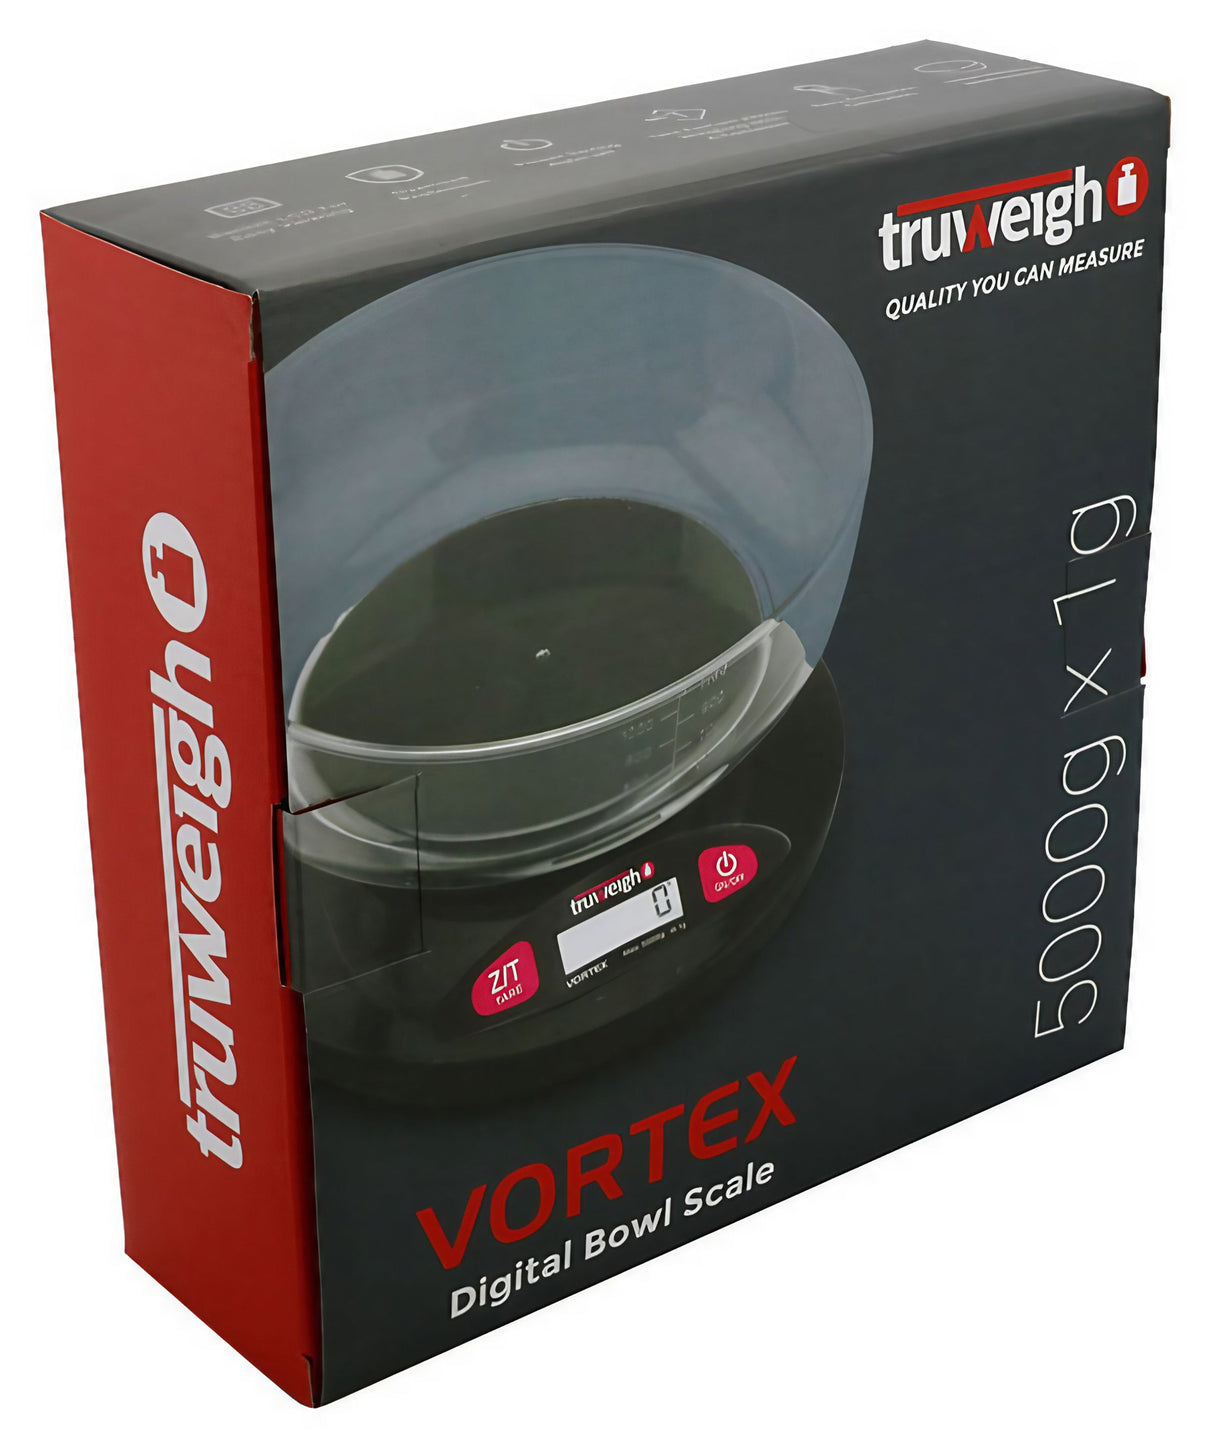 Truweigh Vortex Digital Bowl Scale in packaging, portable black design, ideal for kitchen use